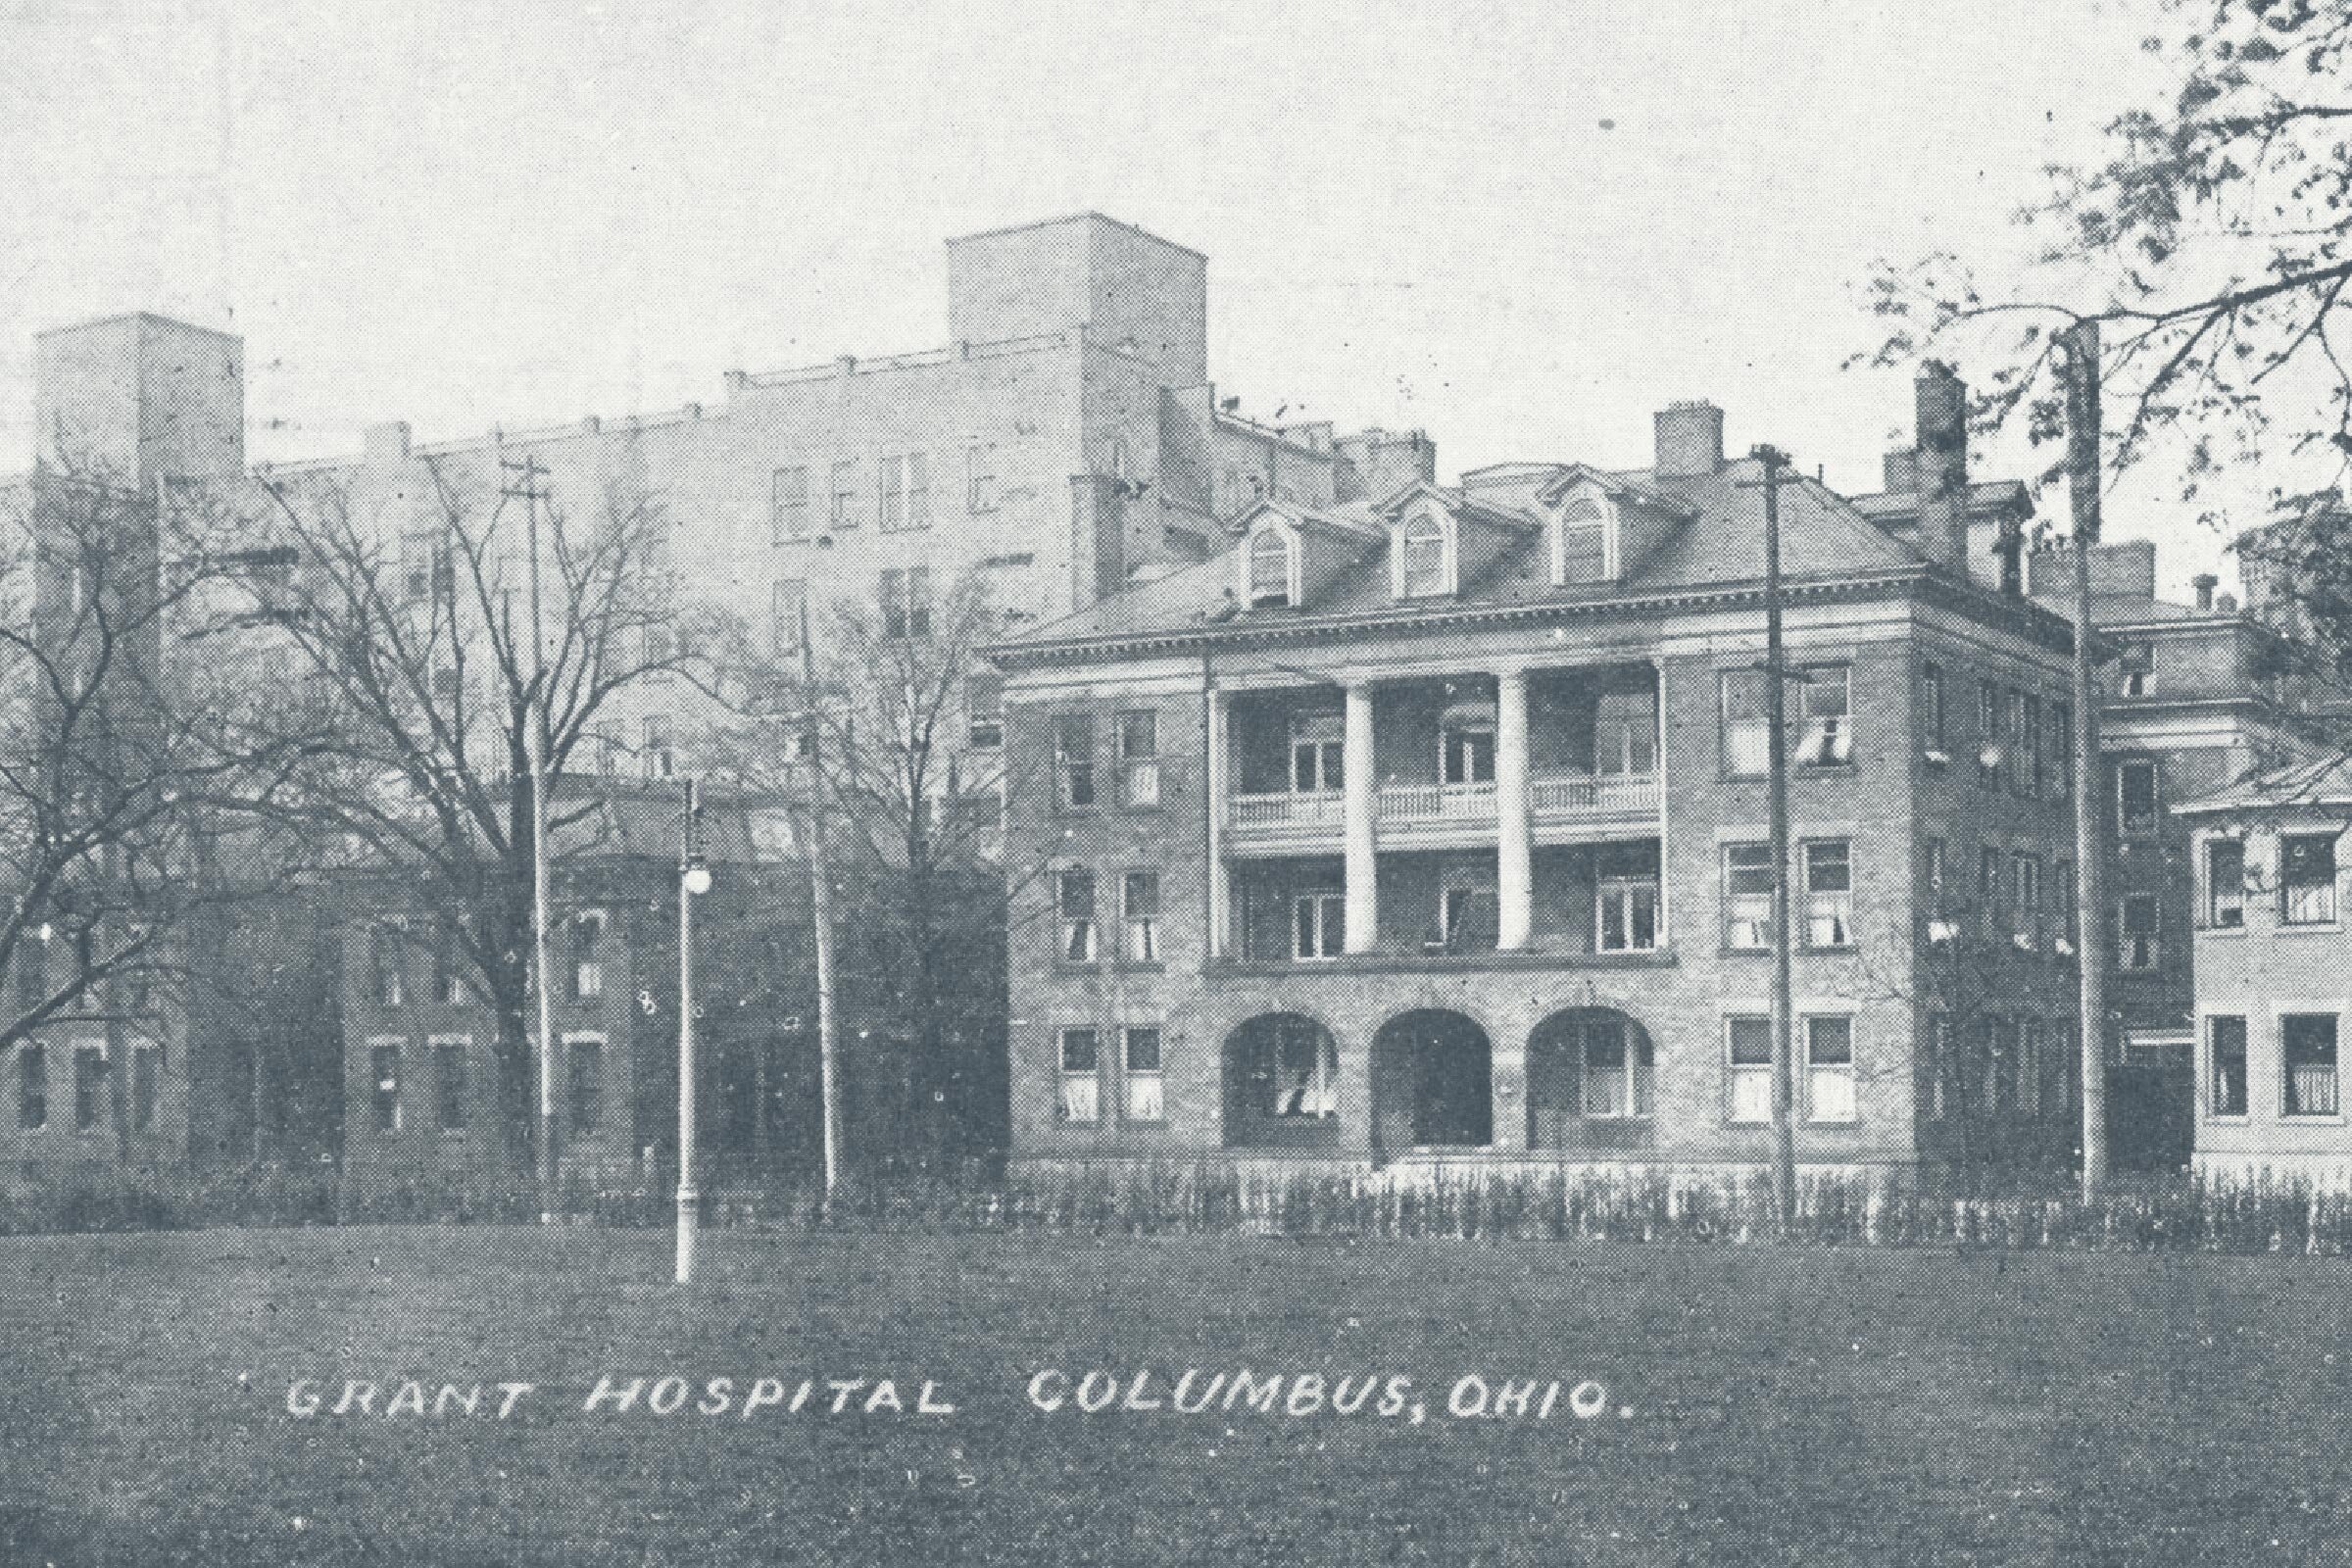 Grant Hospital, 1910. From the Reeb, Deibel, Ruffing Columbus Postcard Collection at Columbus Metropolitan Library.